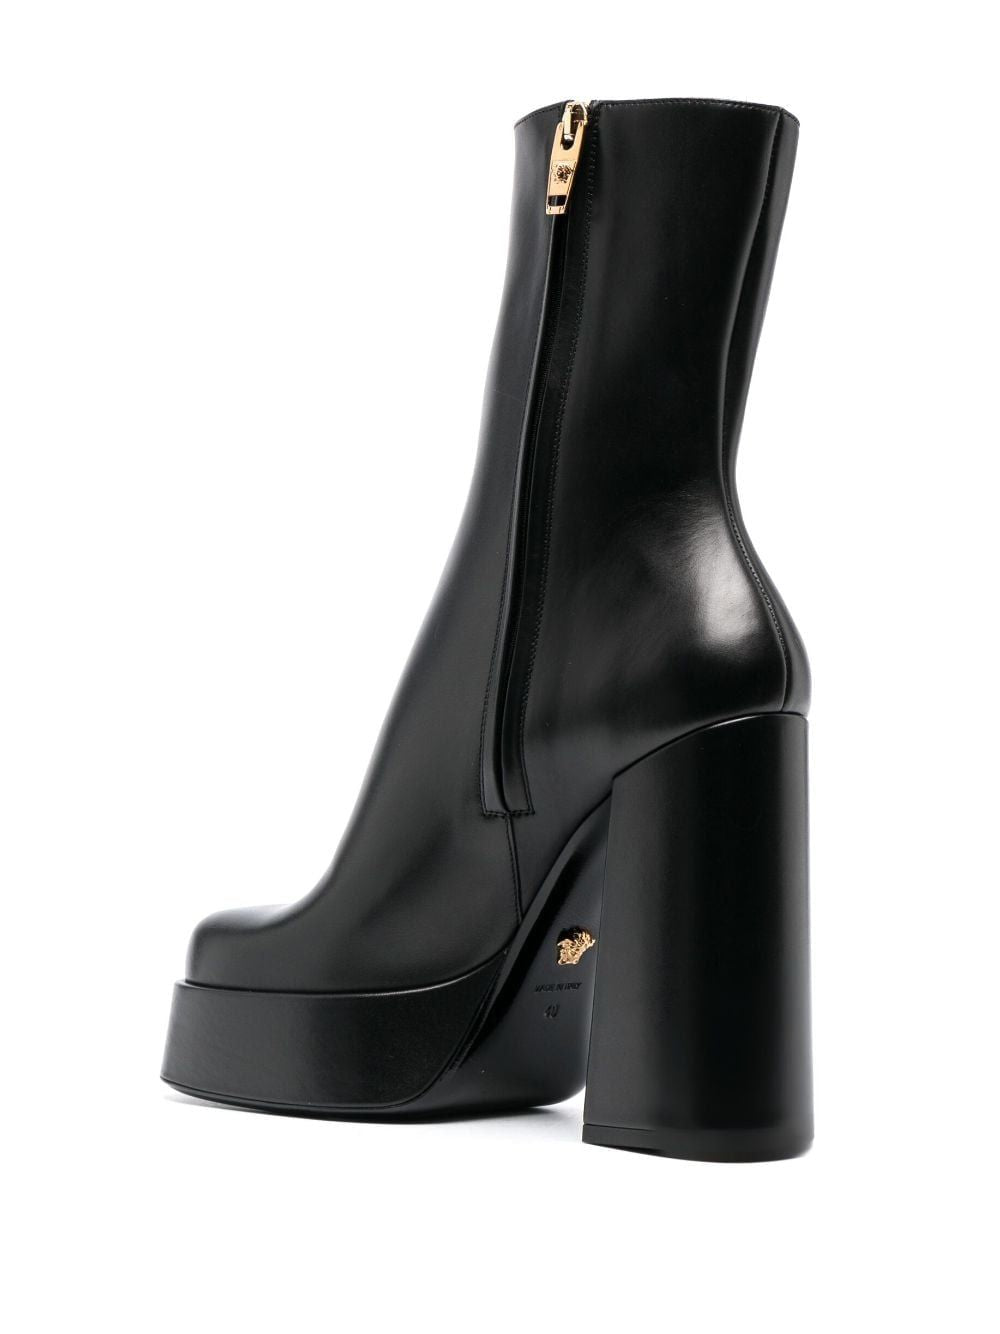 VERSACE Stylish Black Platform Boots for Women in FW23